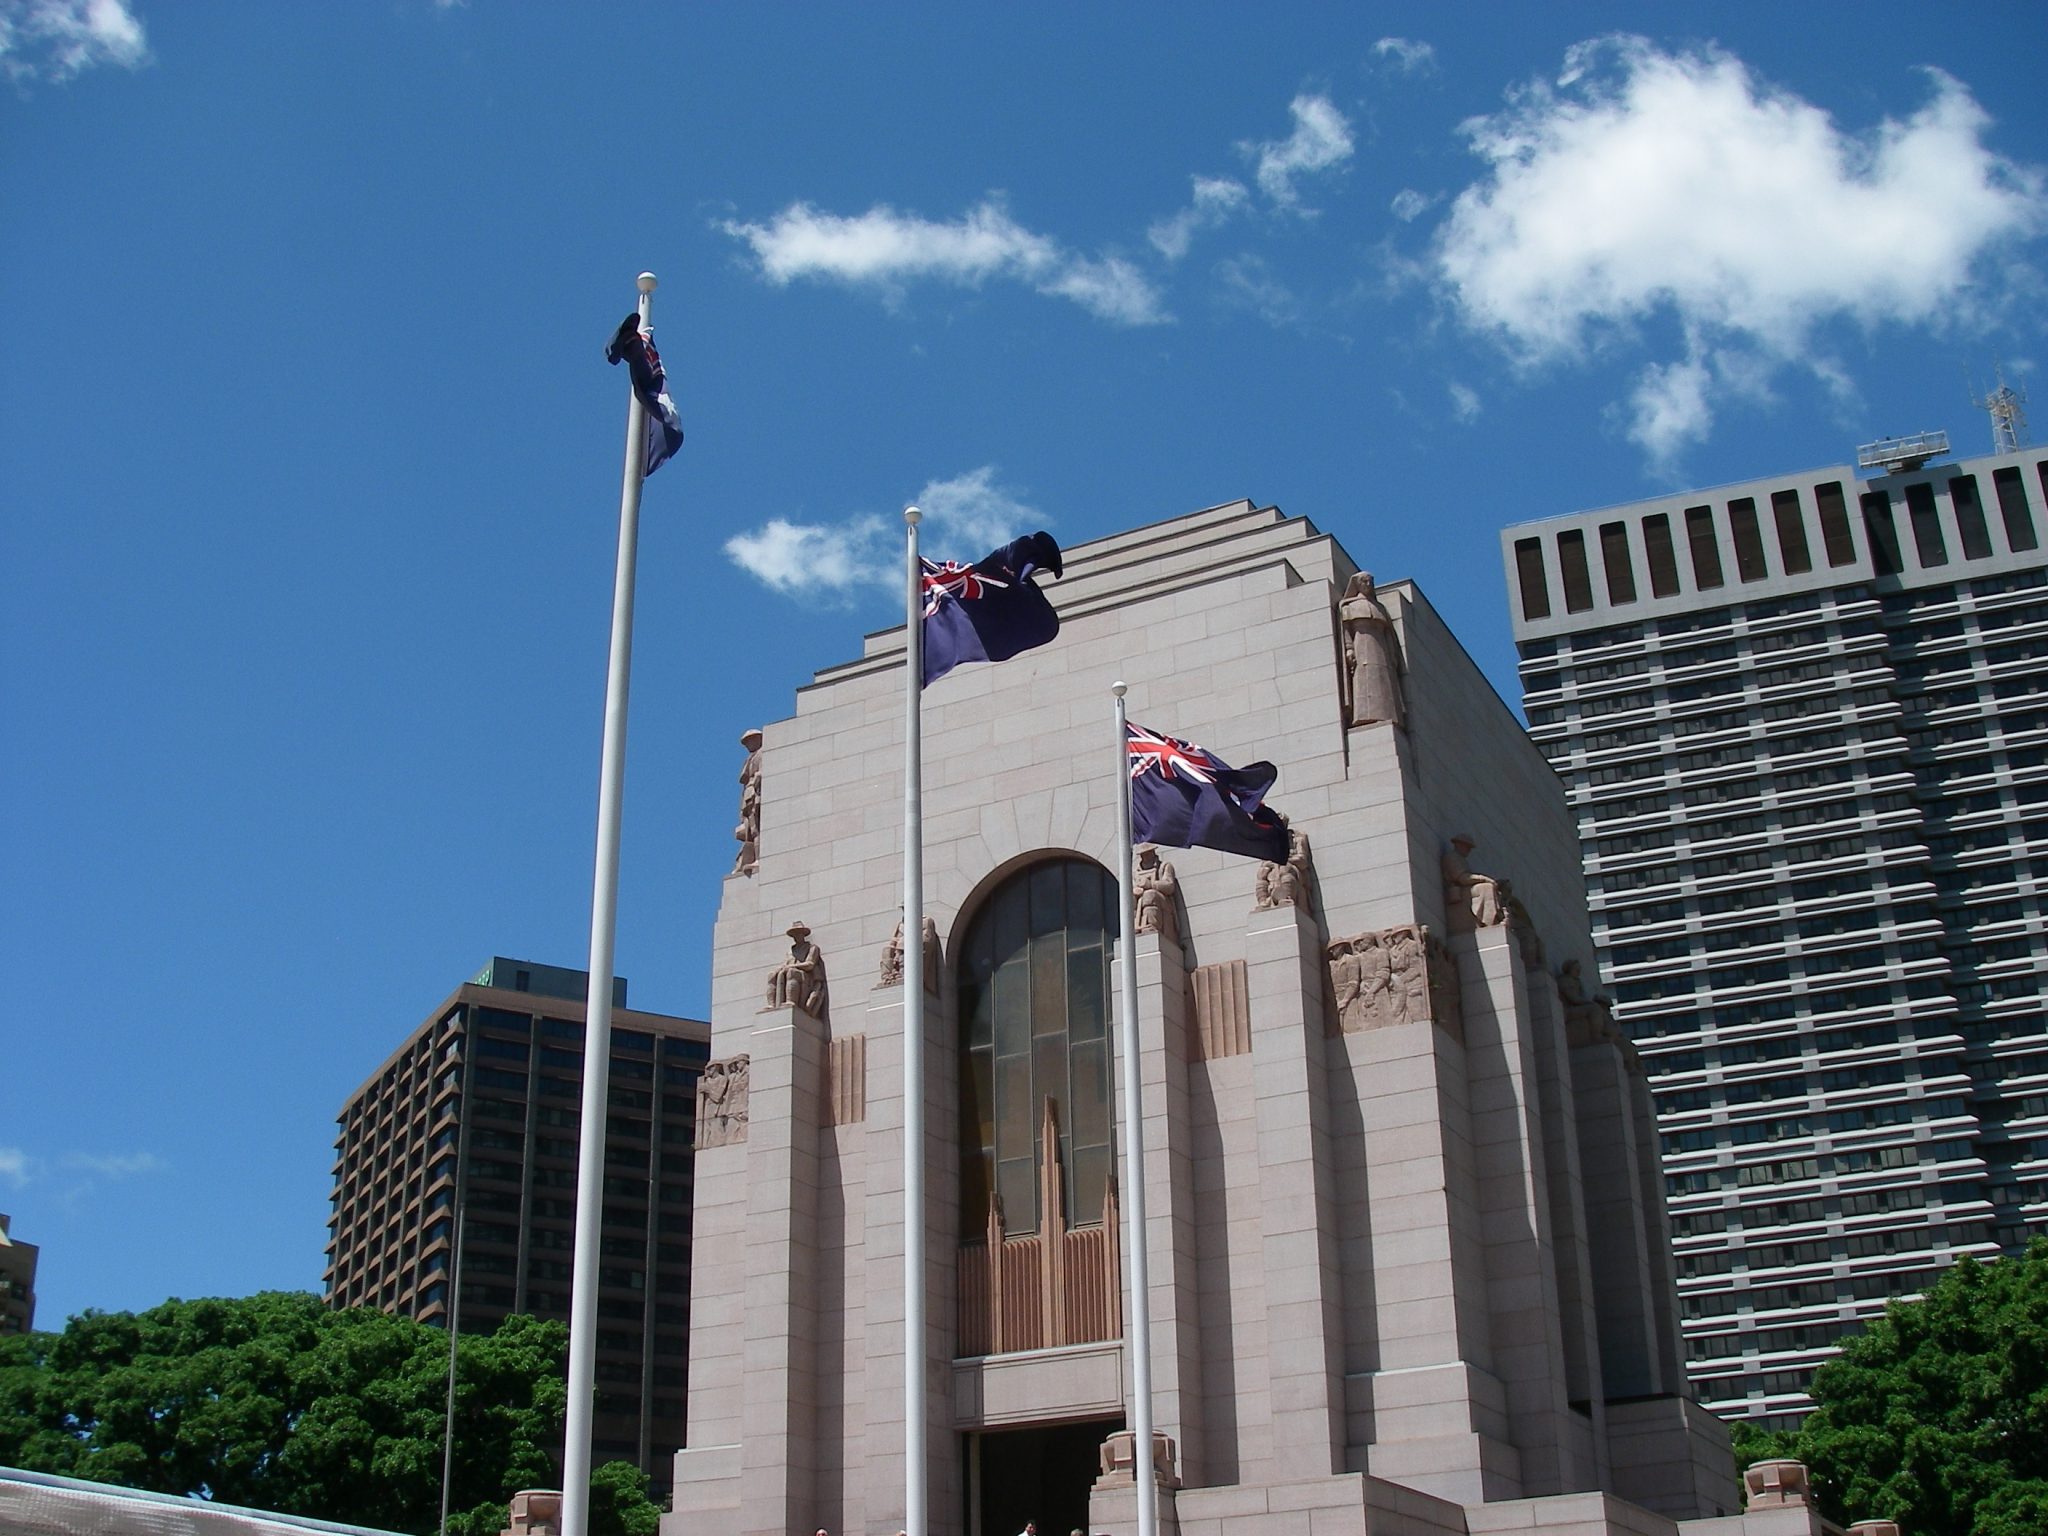 101. The ANZAC War Memorial for Australian military men and women honored those who paid the ultimate sacrifice to their country